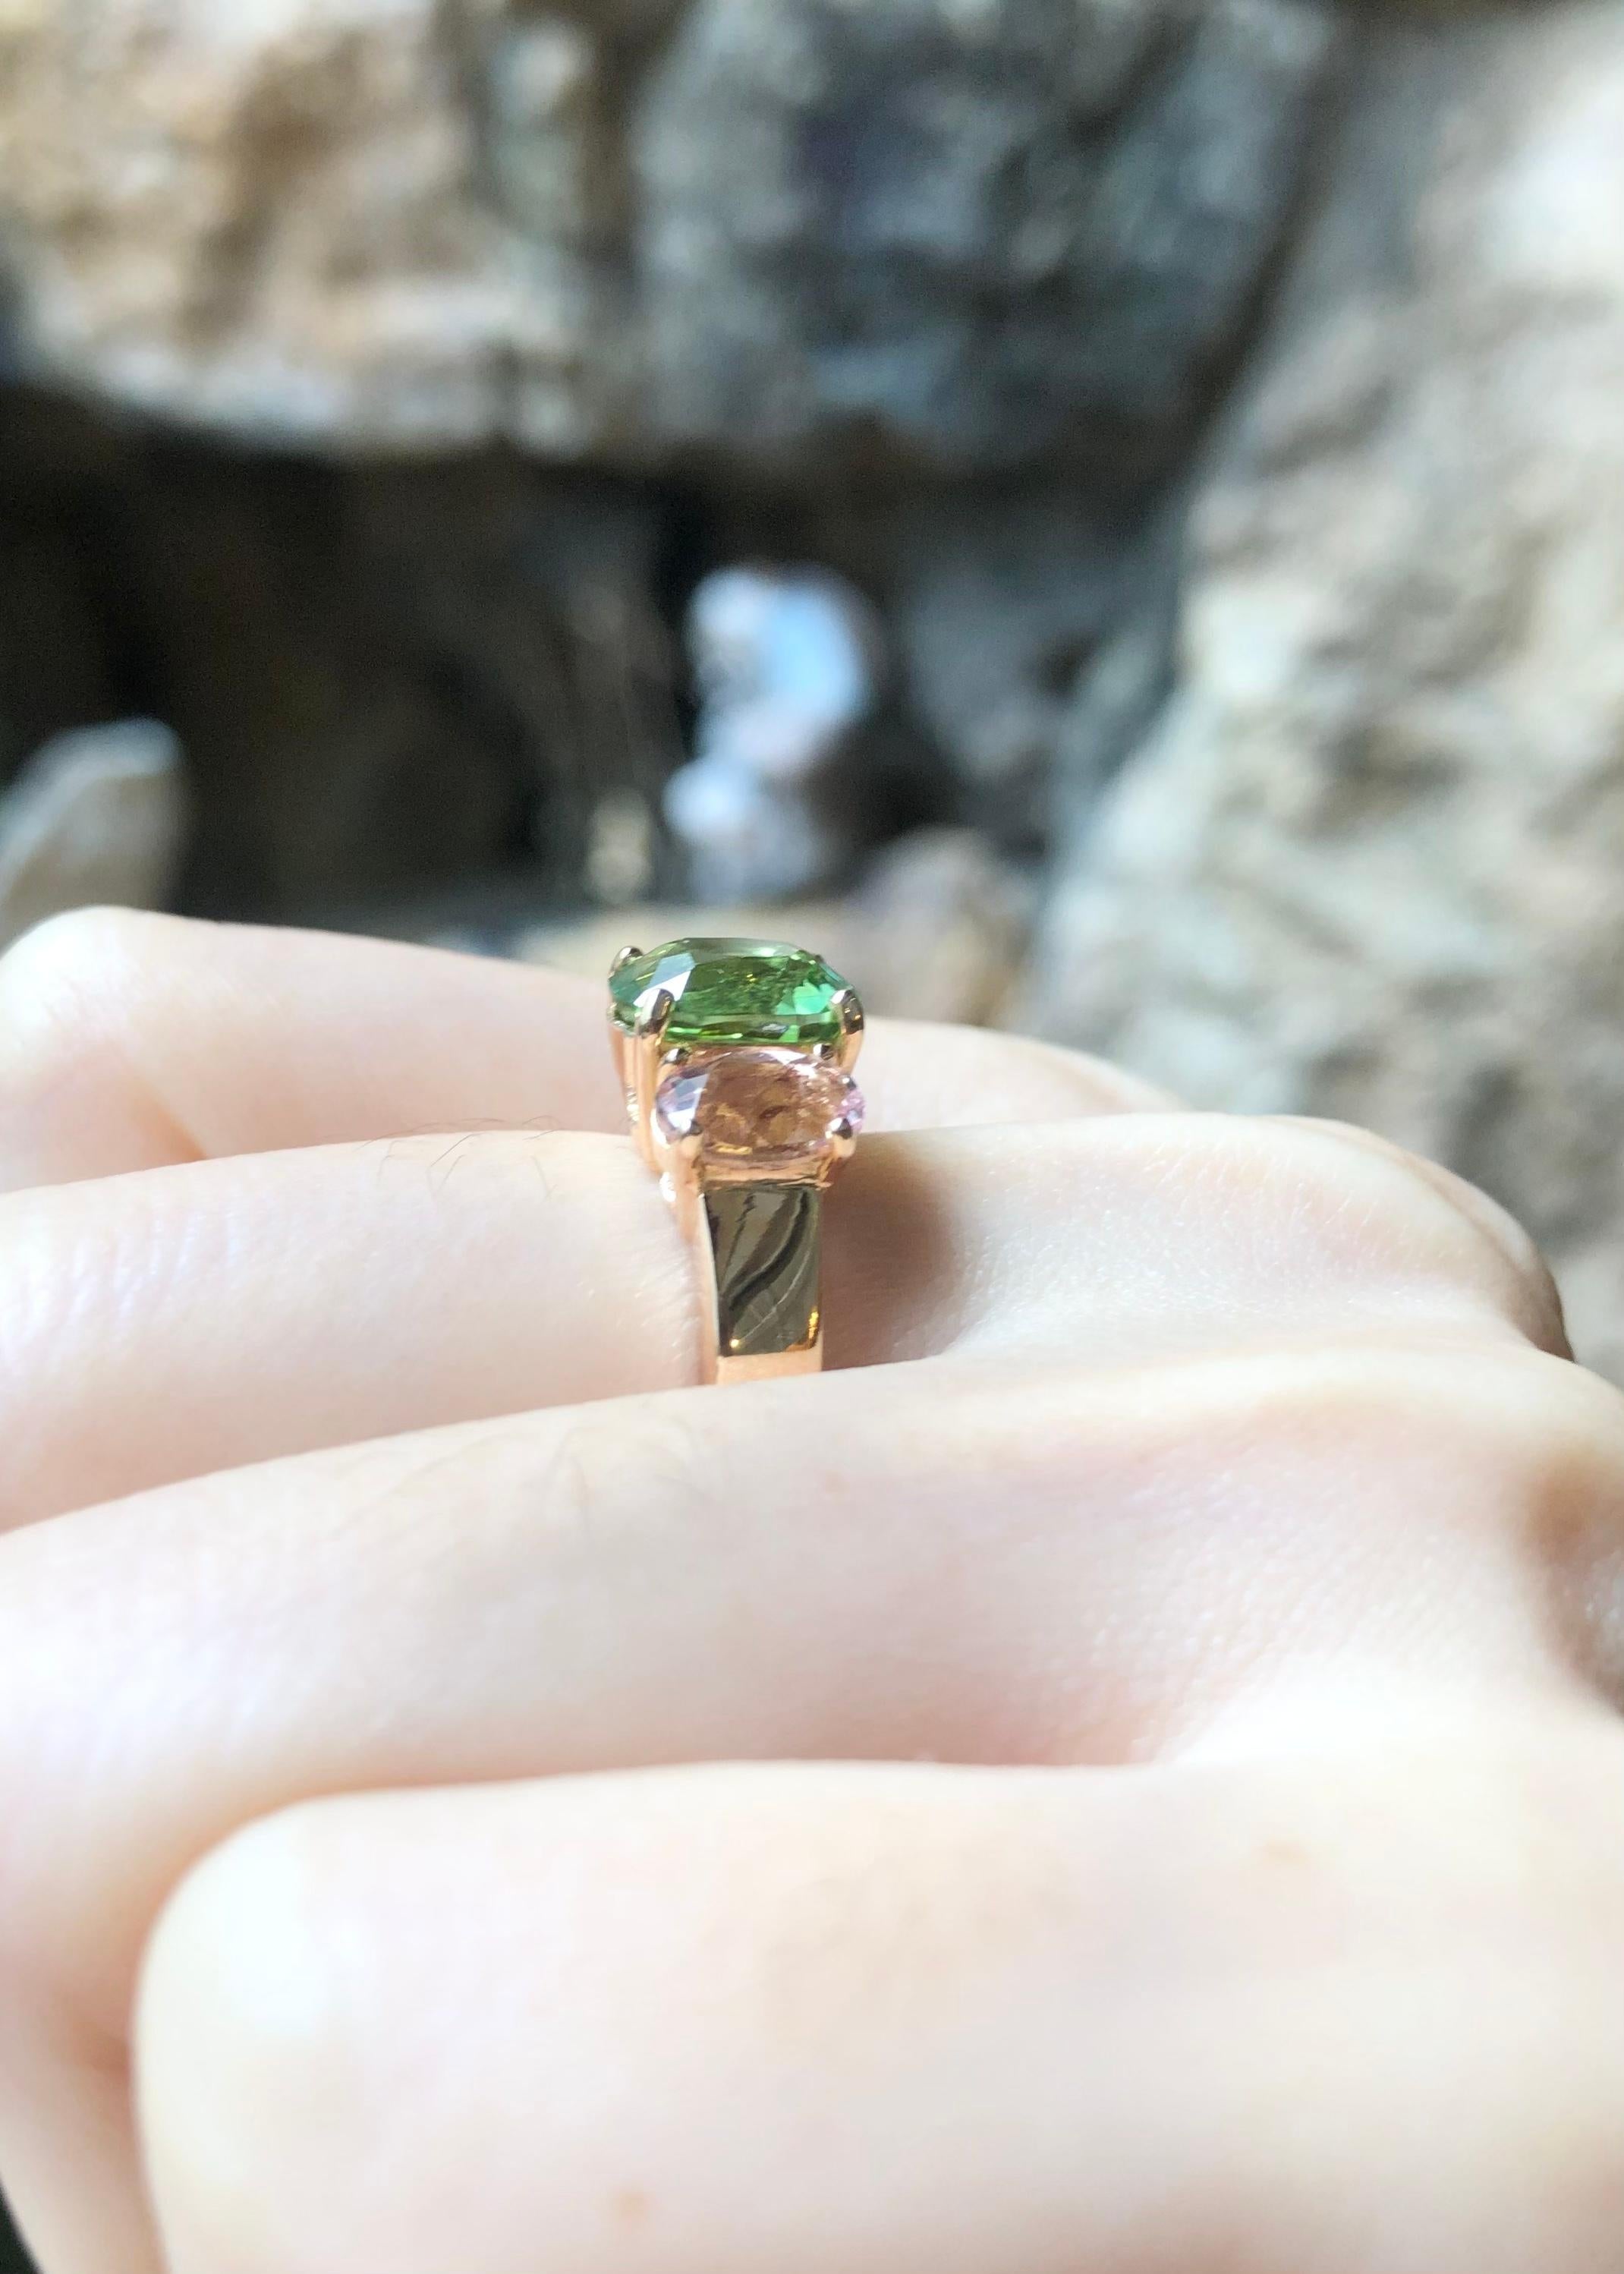 Green Tourmaline 2.55 carats and Morganite 1.73 carats Ring set in 18K Rose Gold Settings

Width:  1.6 cm 
Length: 0.9 cm
Ring Size: 52
Total Weight: 7.42 grams

